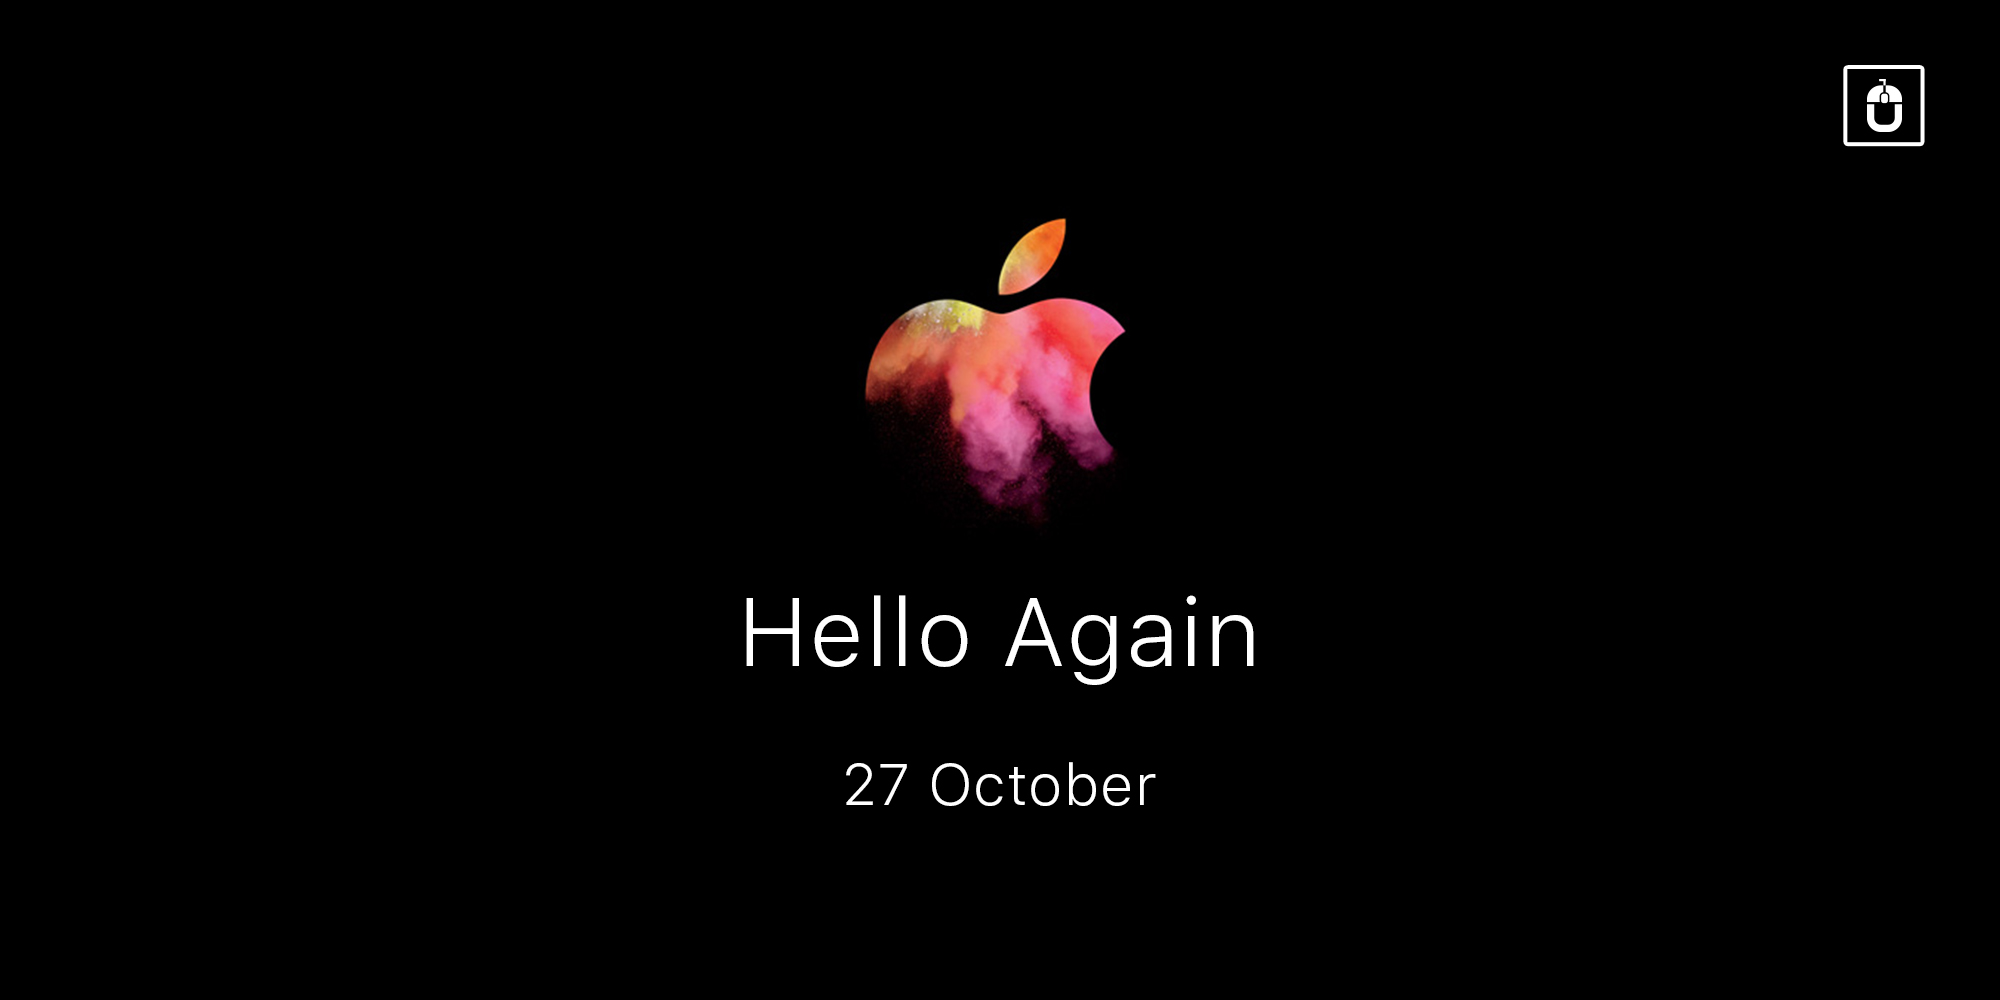 What to Expect from Apple’s October 27th Event